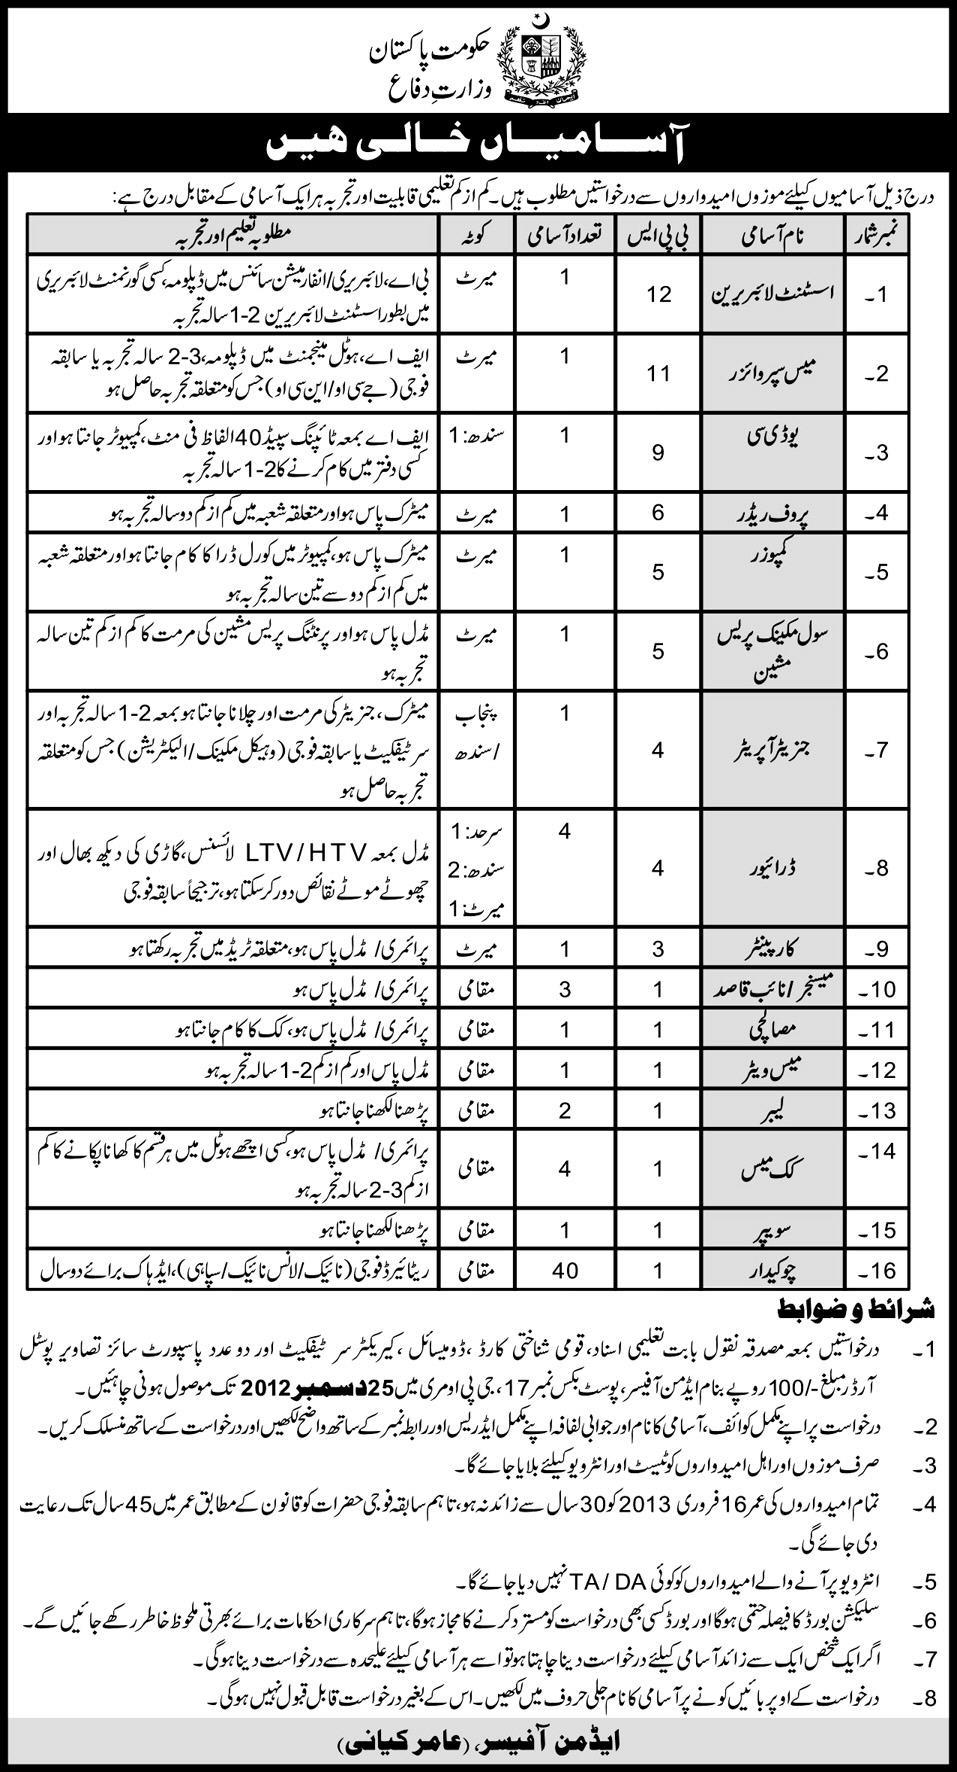 Ministry of Defence Jobs 2012 PO Box 17 GPO Murree